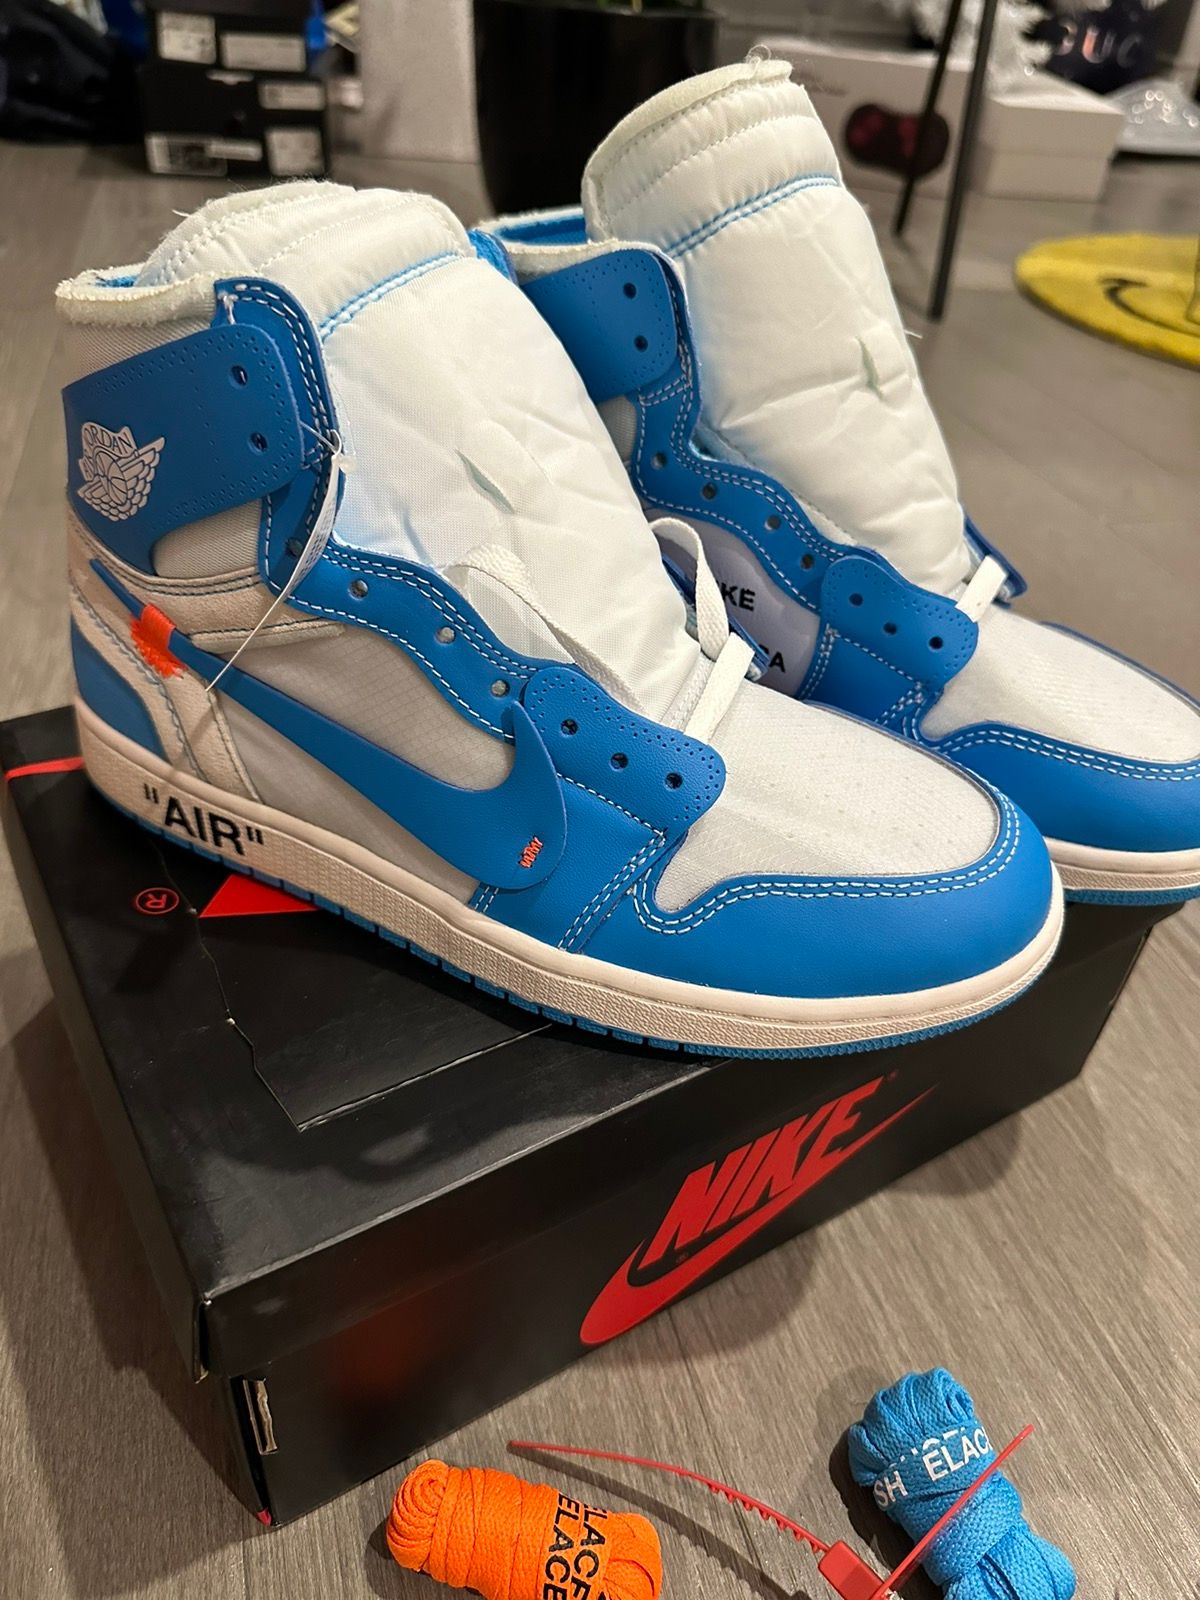 Pre-owned Nike X Off White Air Jordan 1 Unc Shoes In White